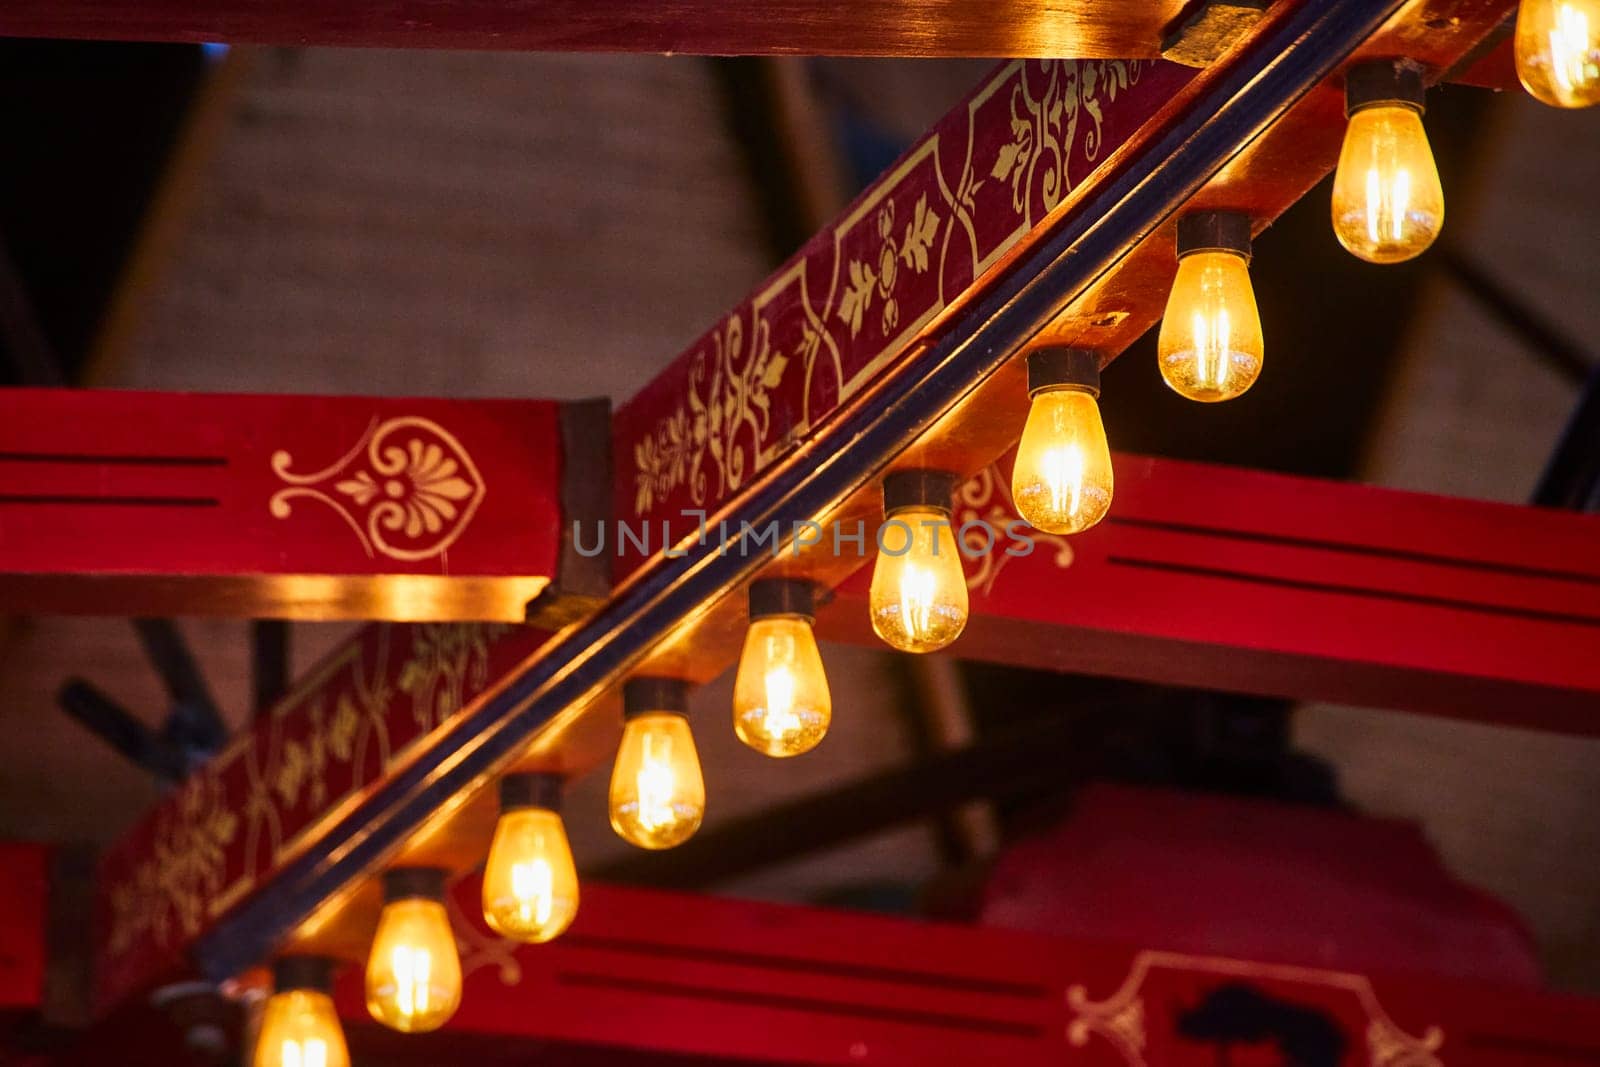 Warm Edison bulbs glow beneath a rich, red and gold railing, blending tradition with modernity in an intimate setting.